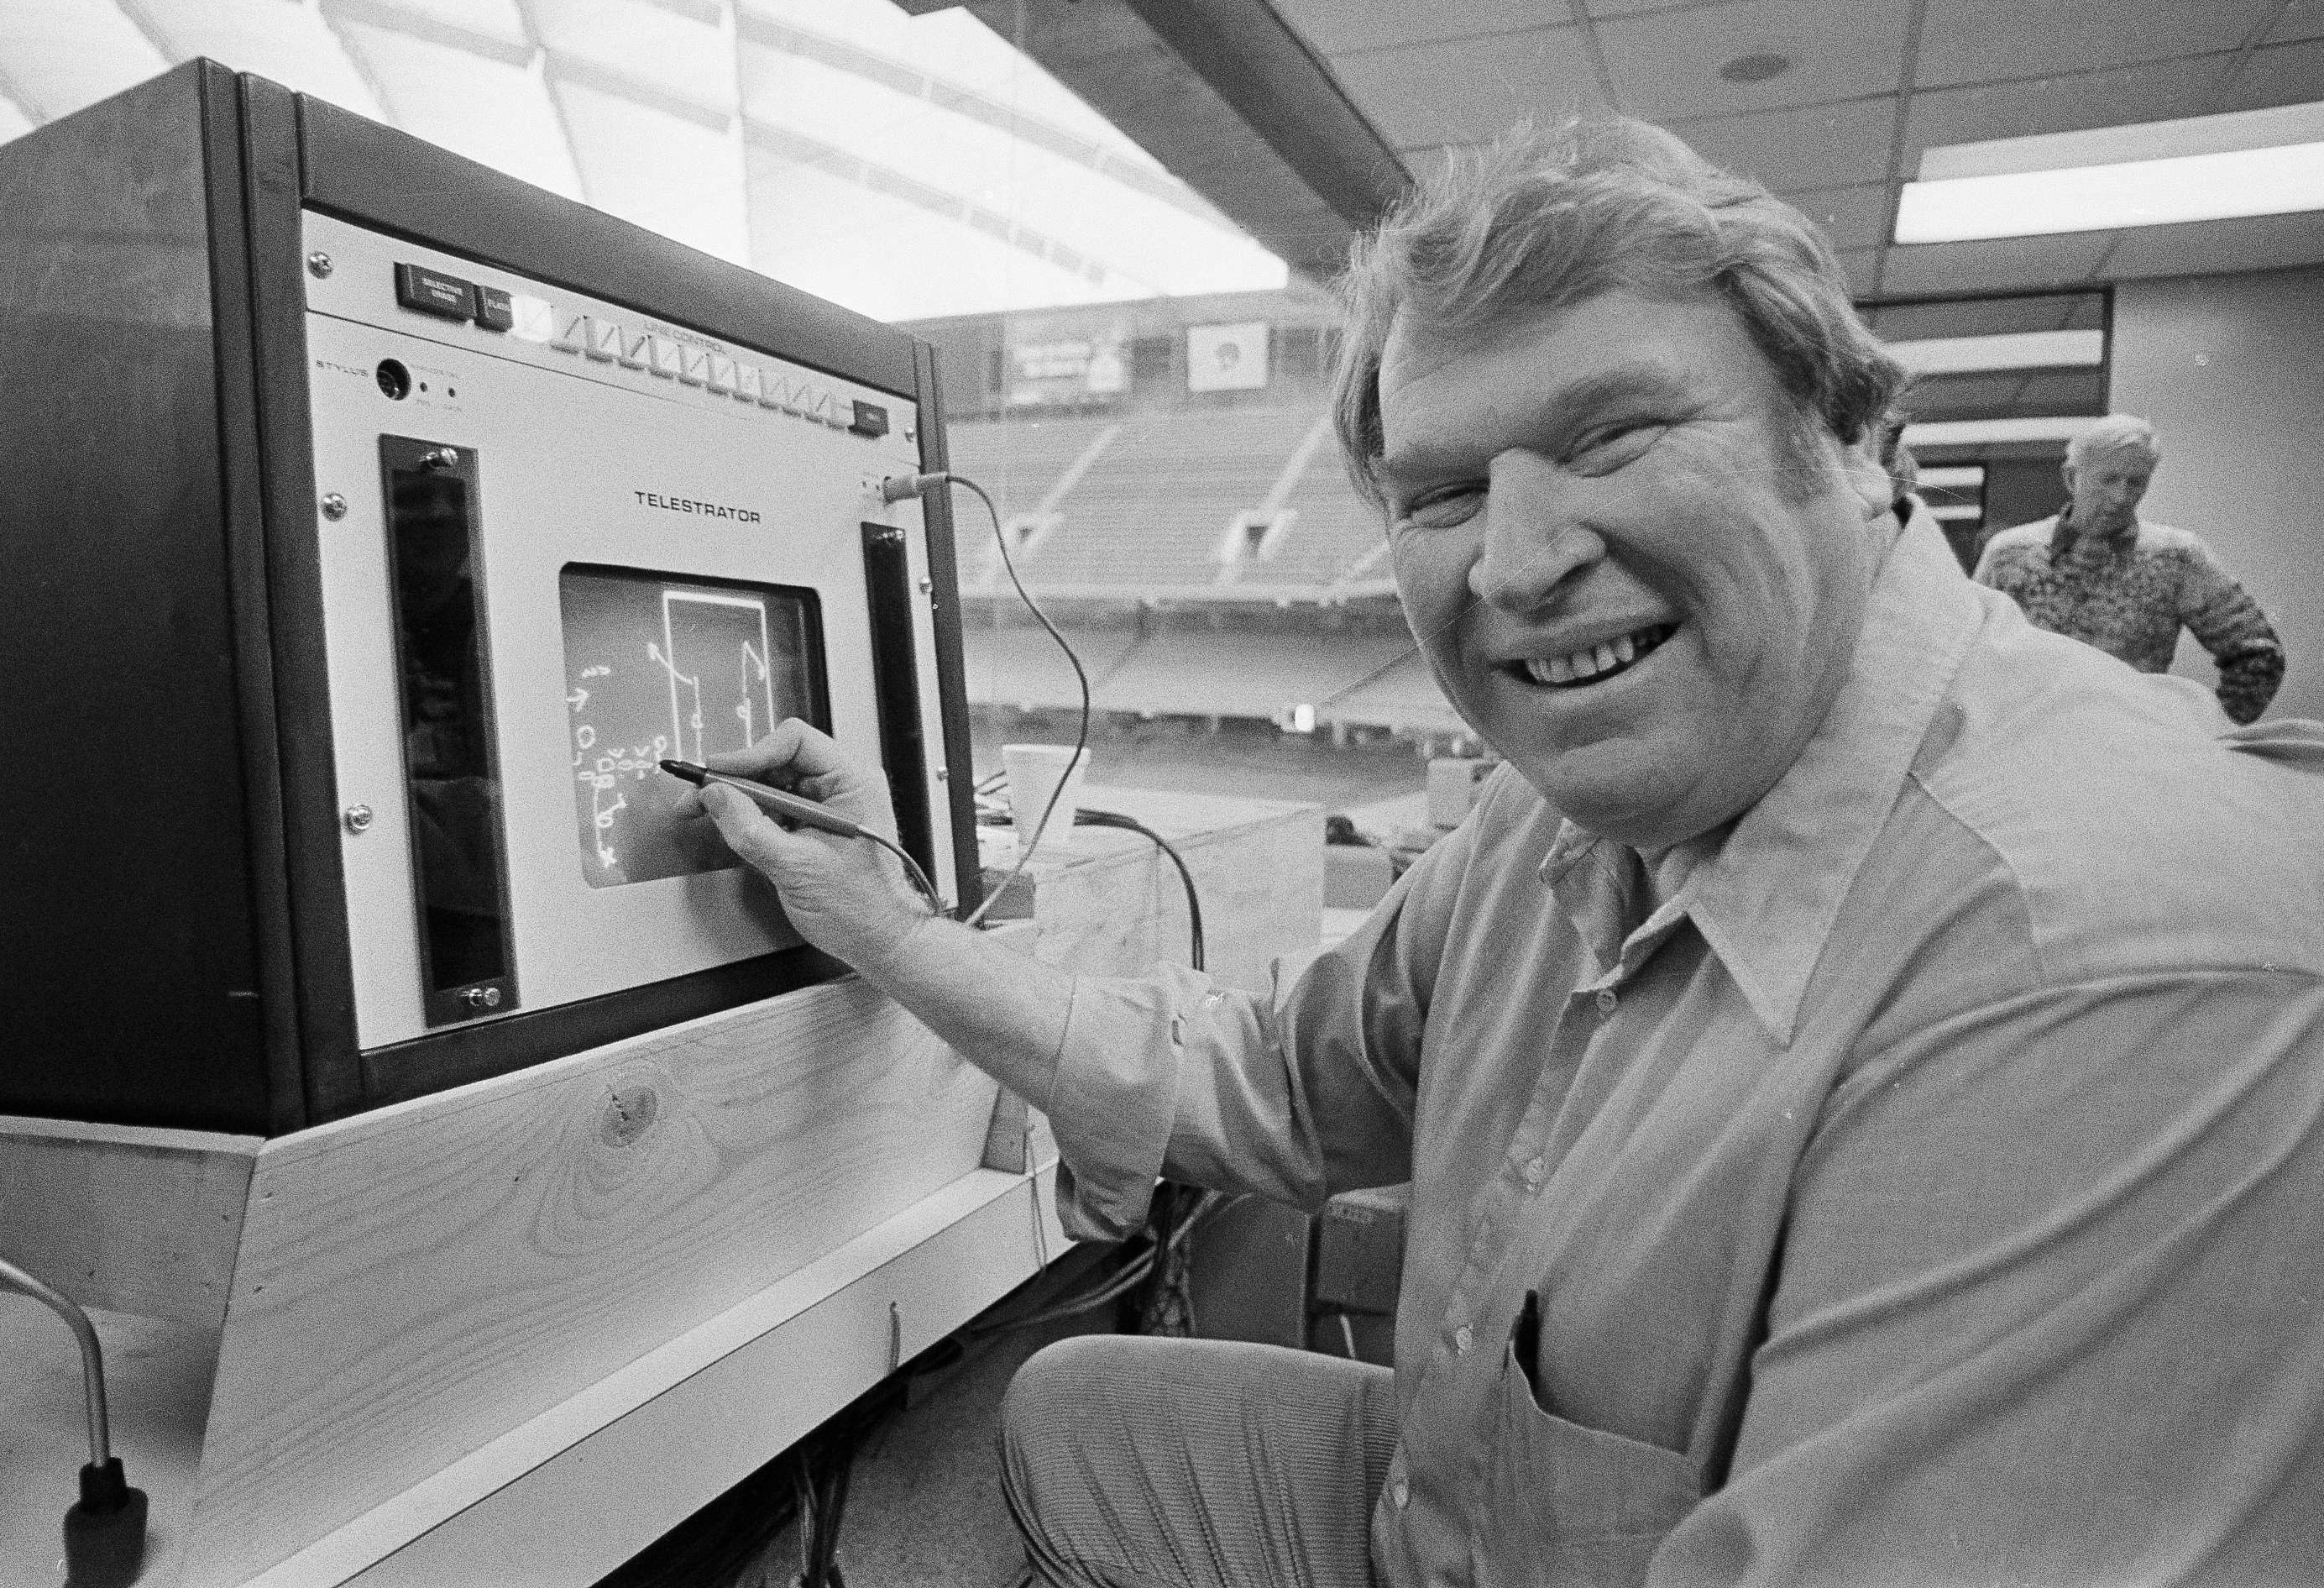 John Madden practices the electronic charting device Telestrator on Jan. 21, 1982, in Pontiac, Mich., for an upcoming NFL Super Bowl broadcast on CBS. Madden, the Hall of Fame coach turned broadcaster whose exuberant calls combined with simple explanations provided a weekly soundtrack to NFL games for three decades, died Tuesday morning, Dec. 28, 2021, the league said. He was 85. (AP)